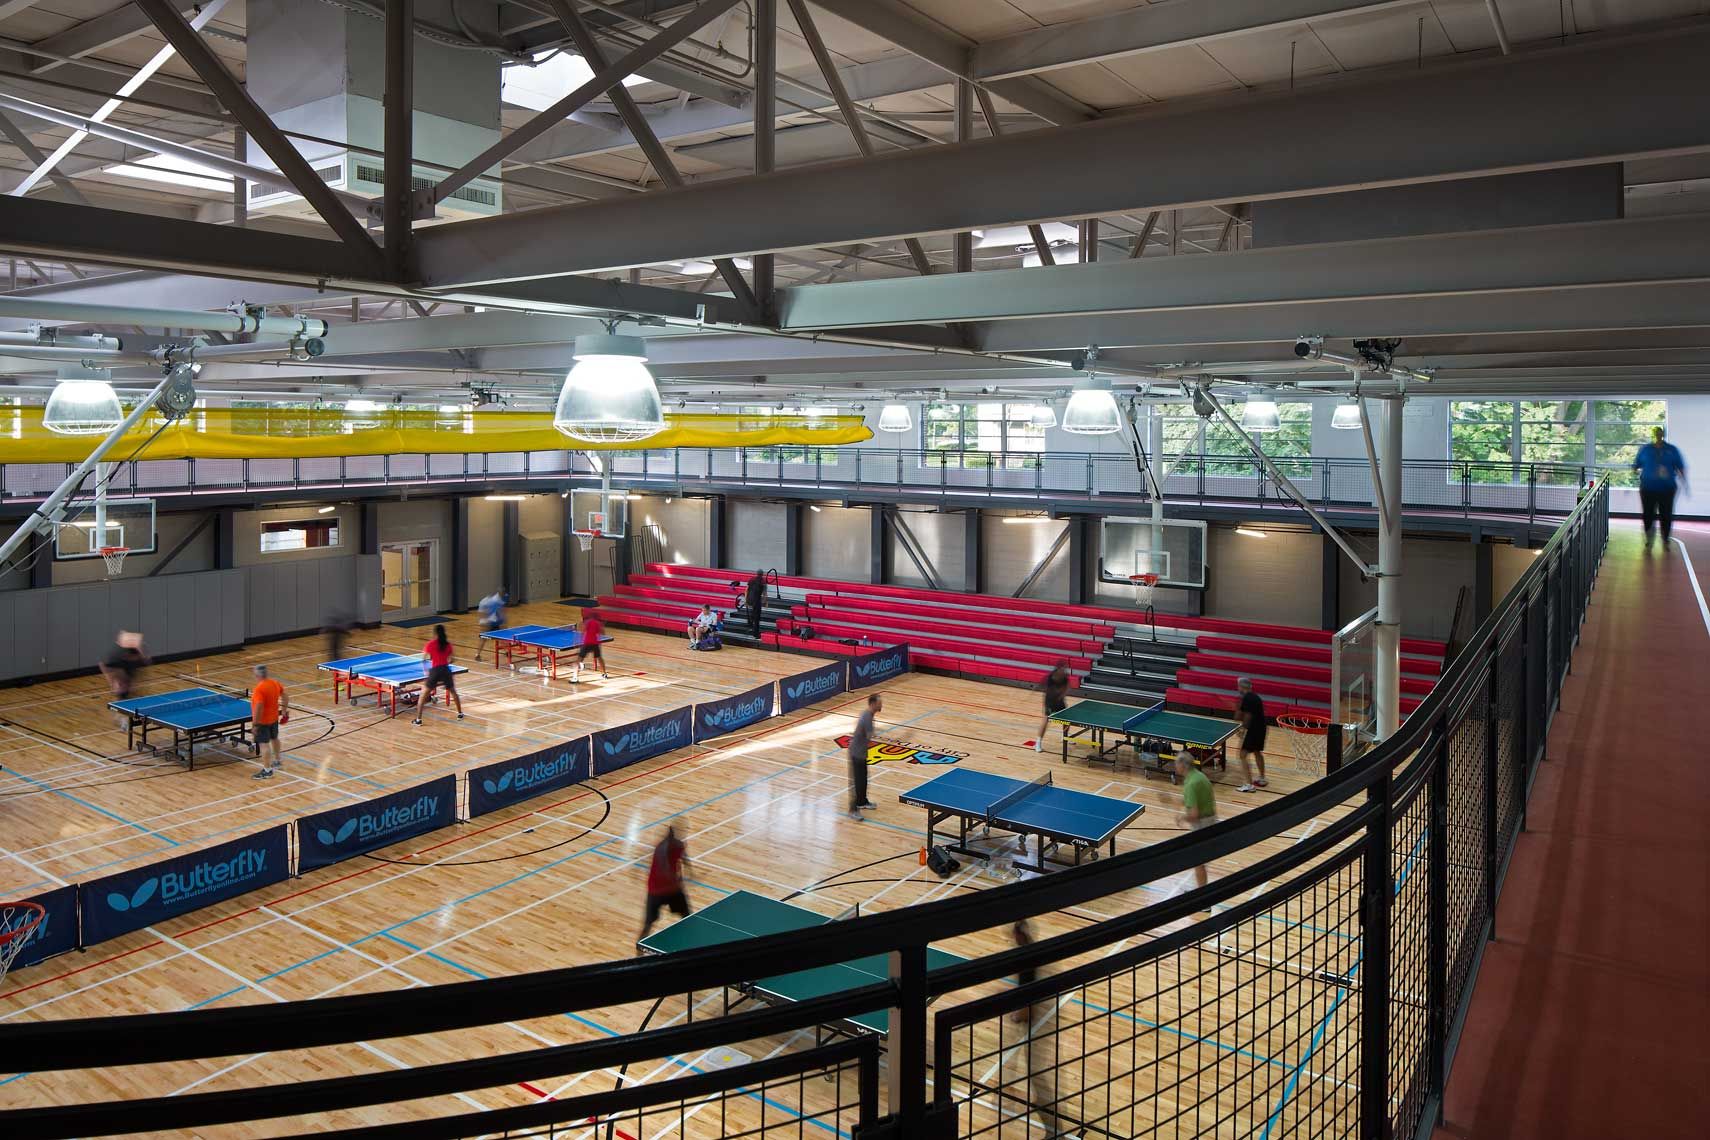 An interior view of the gymnasium at the Decatur Recreation Center featuring many people playing ping pong and walking the track.